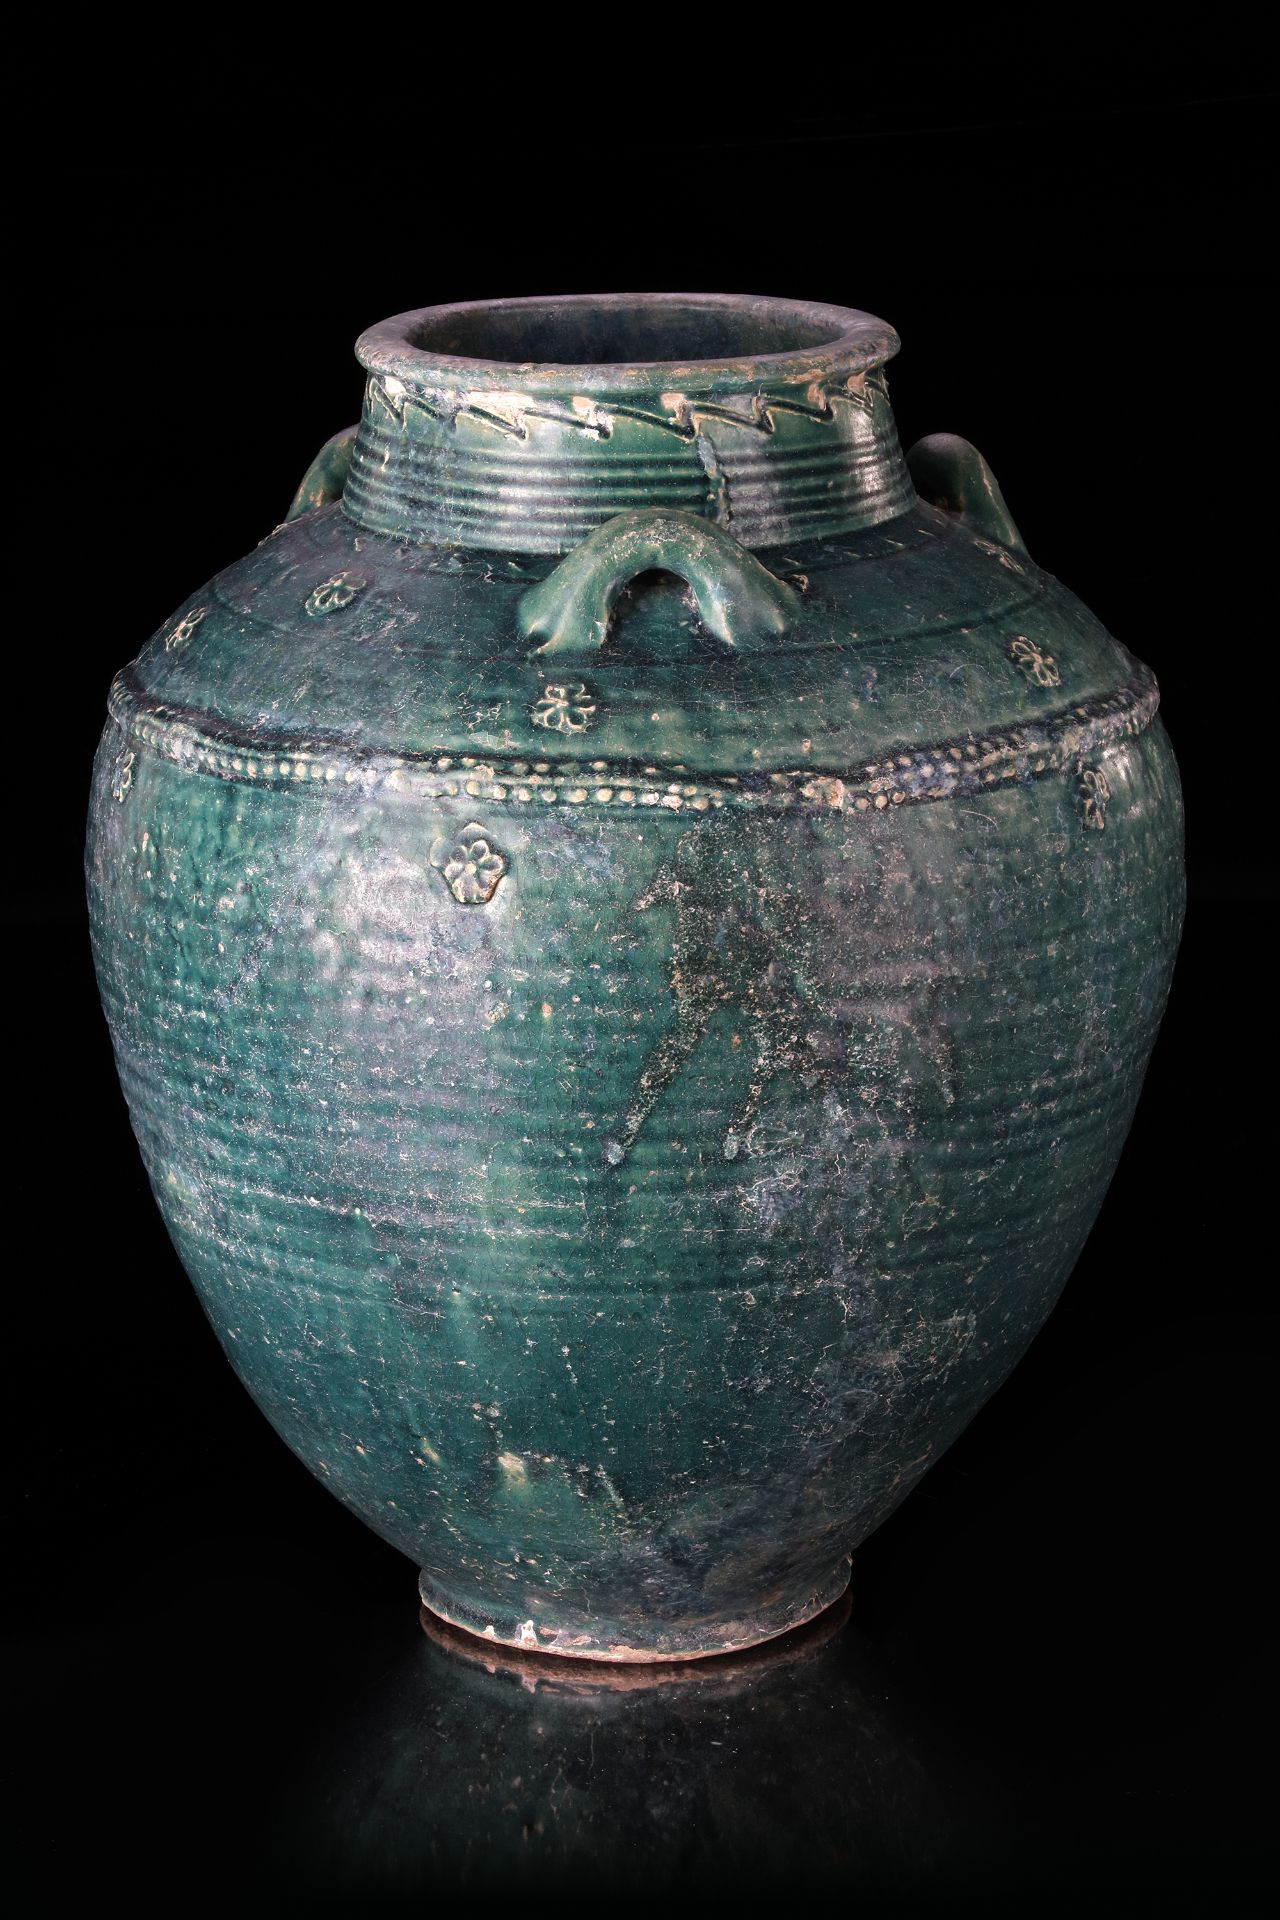 A LARGE POST SASSANIAN TURQUOISE GLAZED POTTERY STORAGE JAR, PERSIA, 6TH-8TH CENTURY - Image 2 of 3